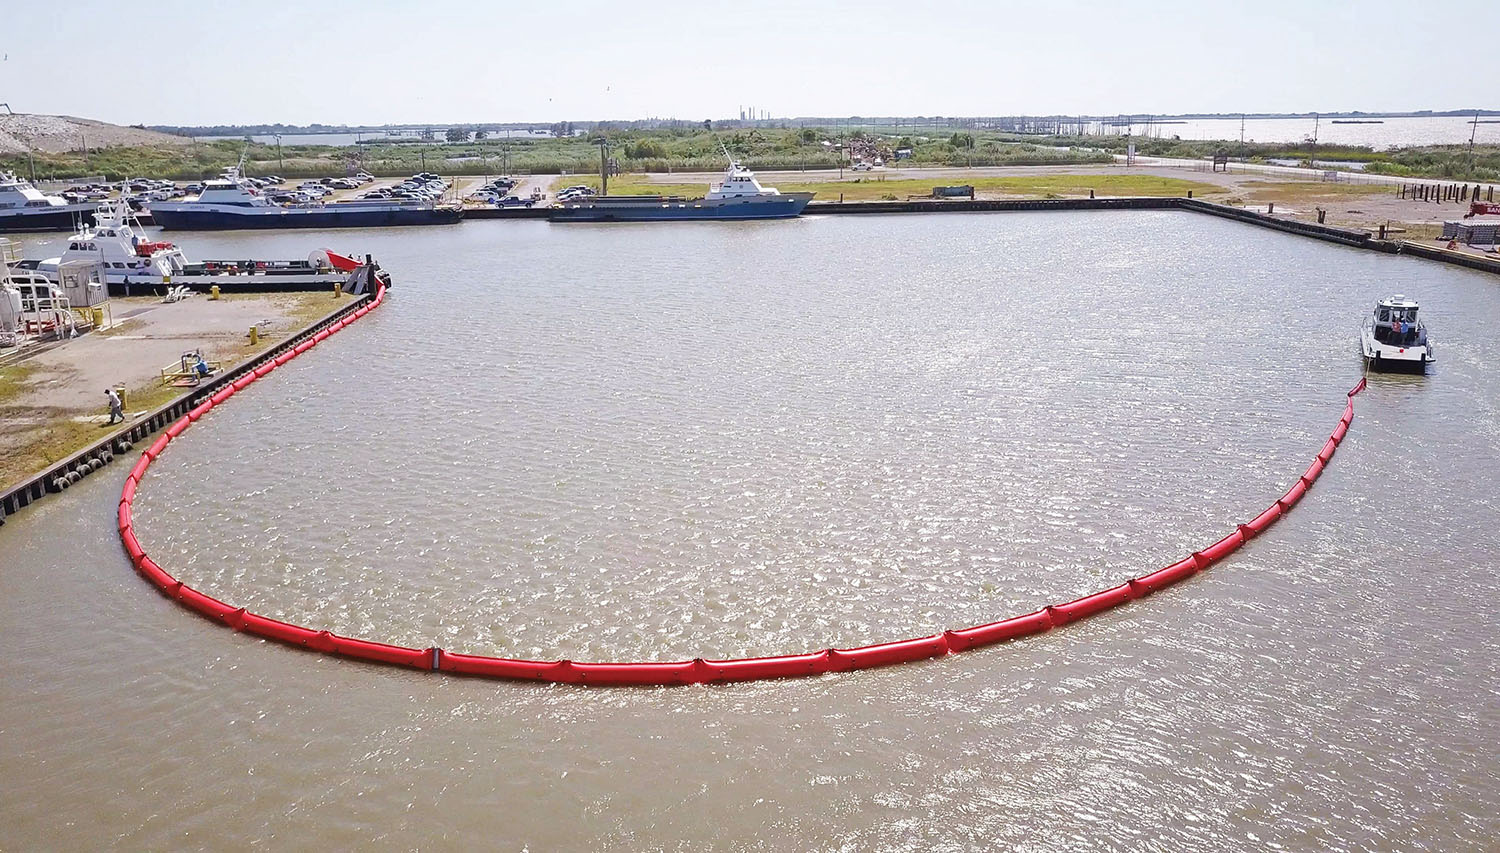 The Onboard Oil Containment System includes an automated reel ready for instant deployment.